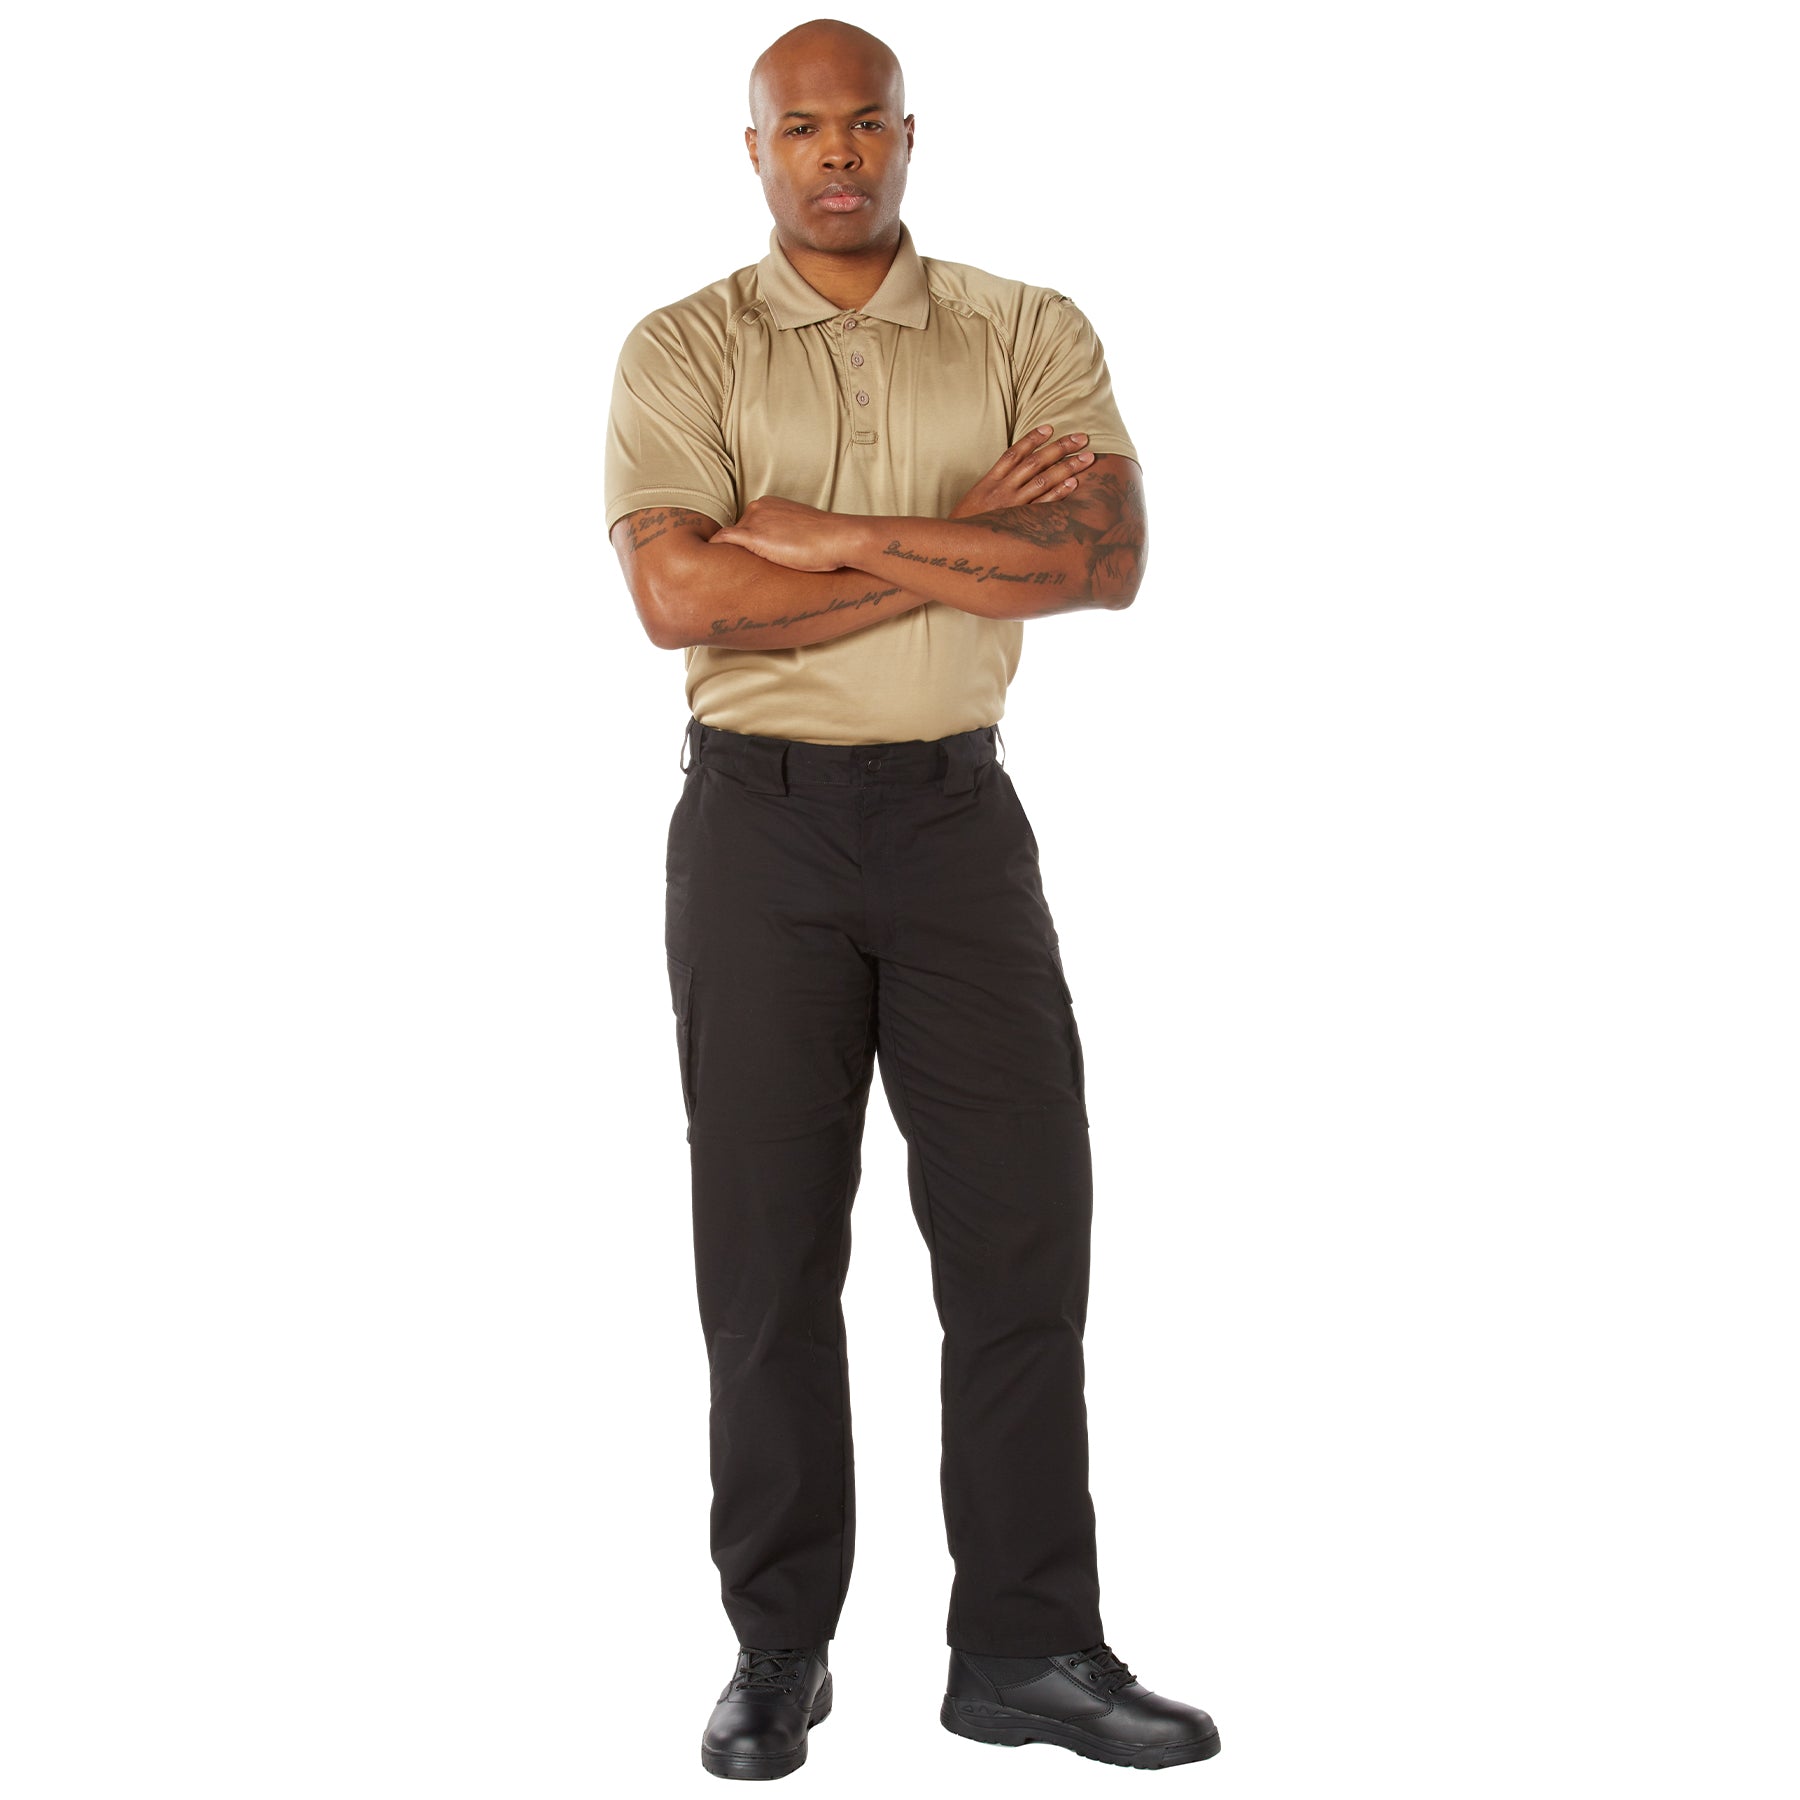 10-8 Lightweight Poly/Cotton/Spandex Rip-Stop Field Tactical Pants Black